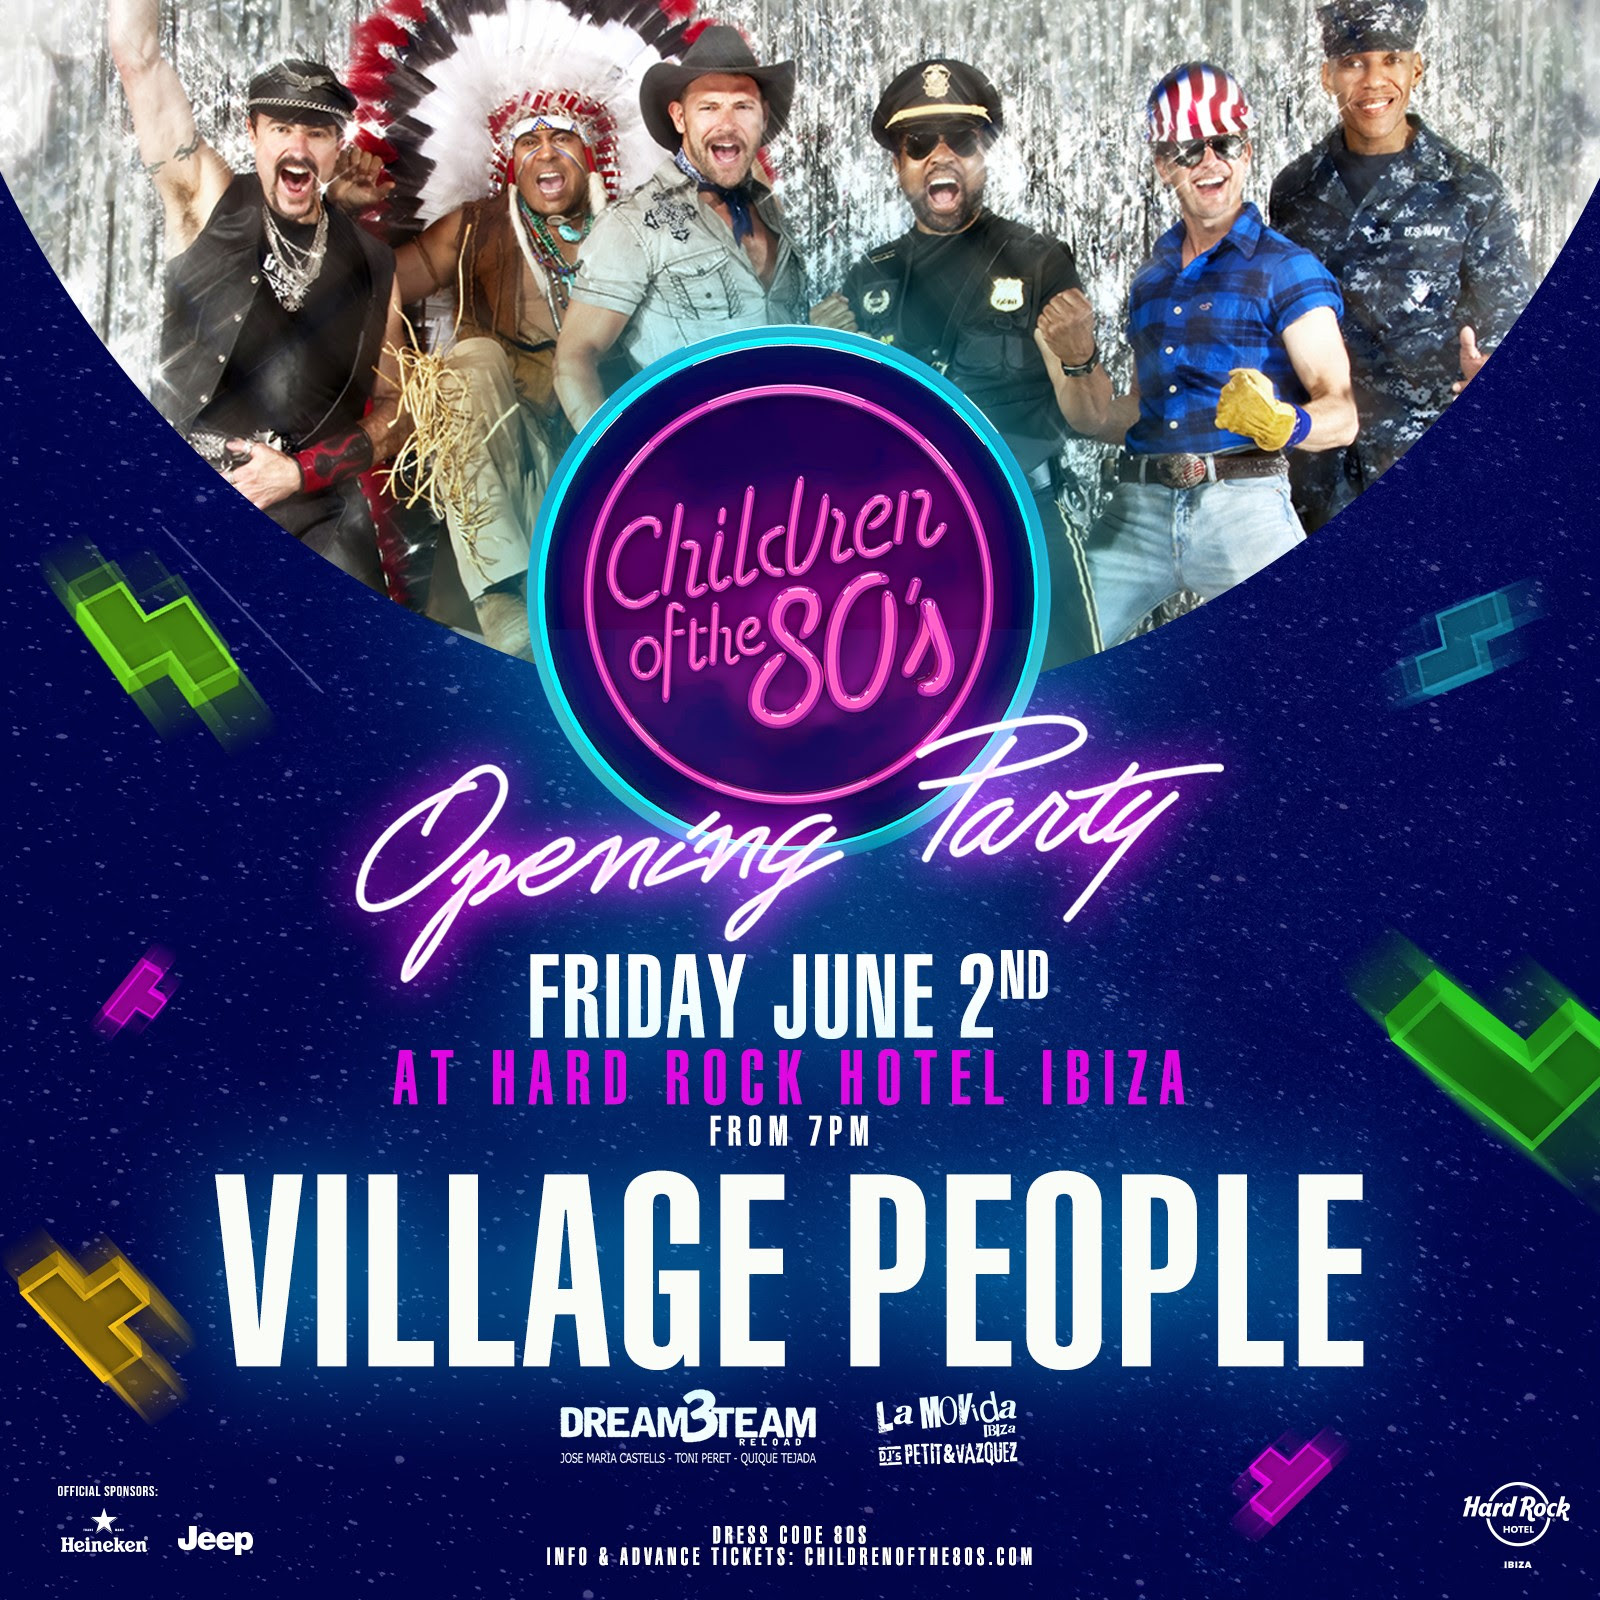 Village People to headline opening of ‘Children of the 80’s' in Ibiza